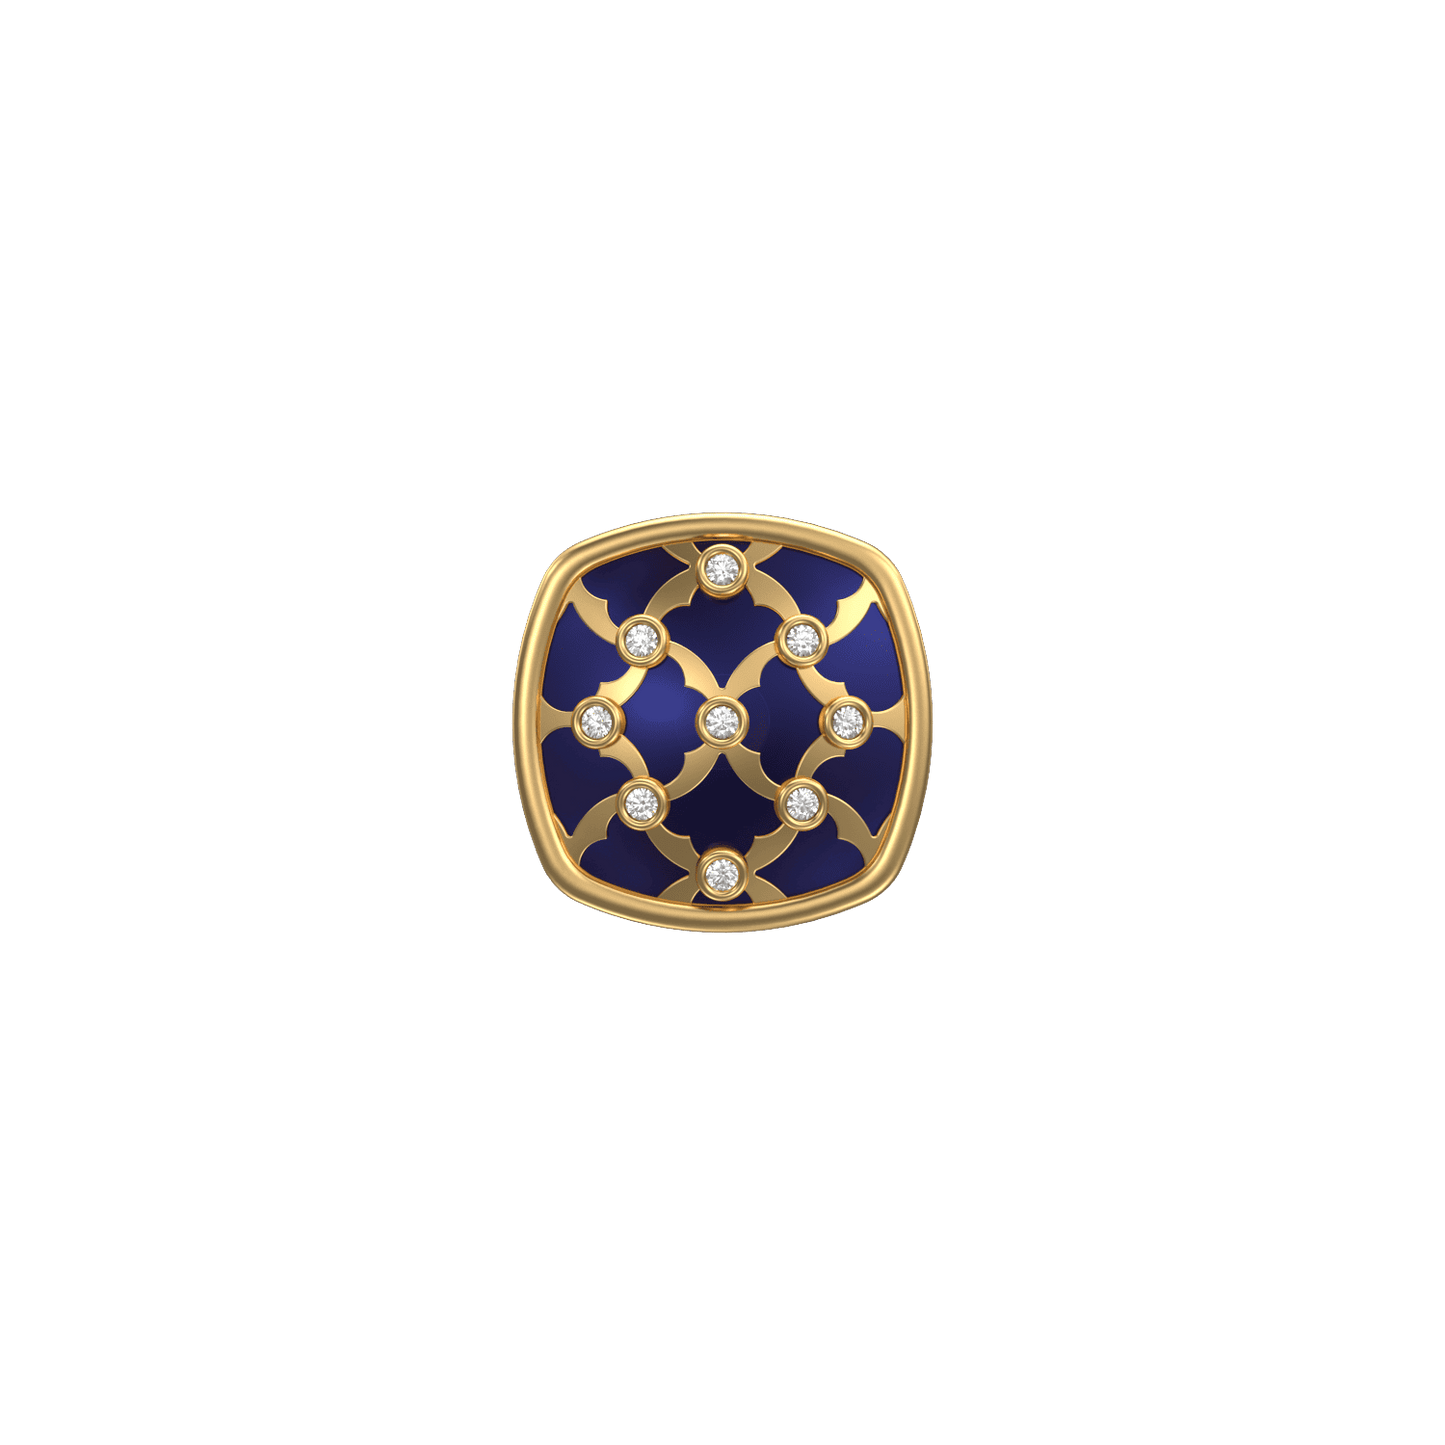 Enchanted Luxe, Classic Kurta Button Set with CZ Diamonds, 18kt Gold Plating and Enamel.